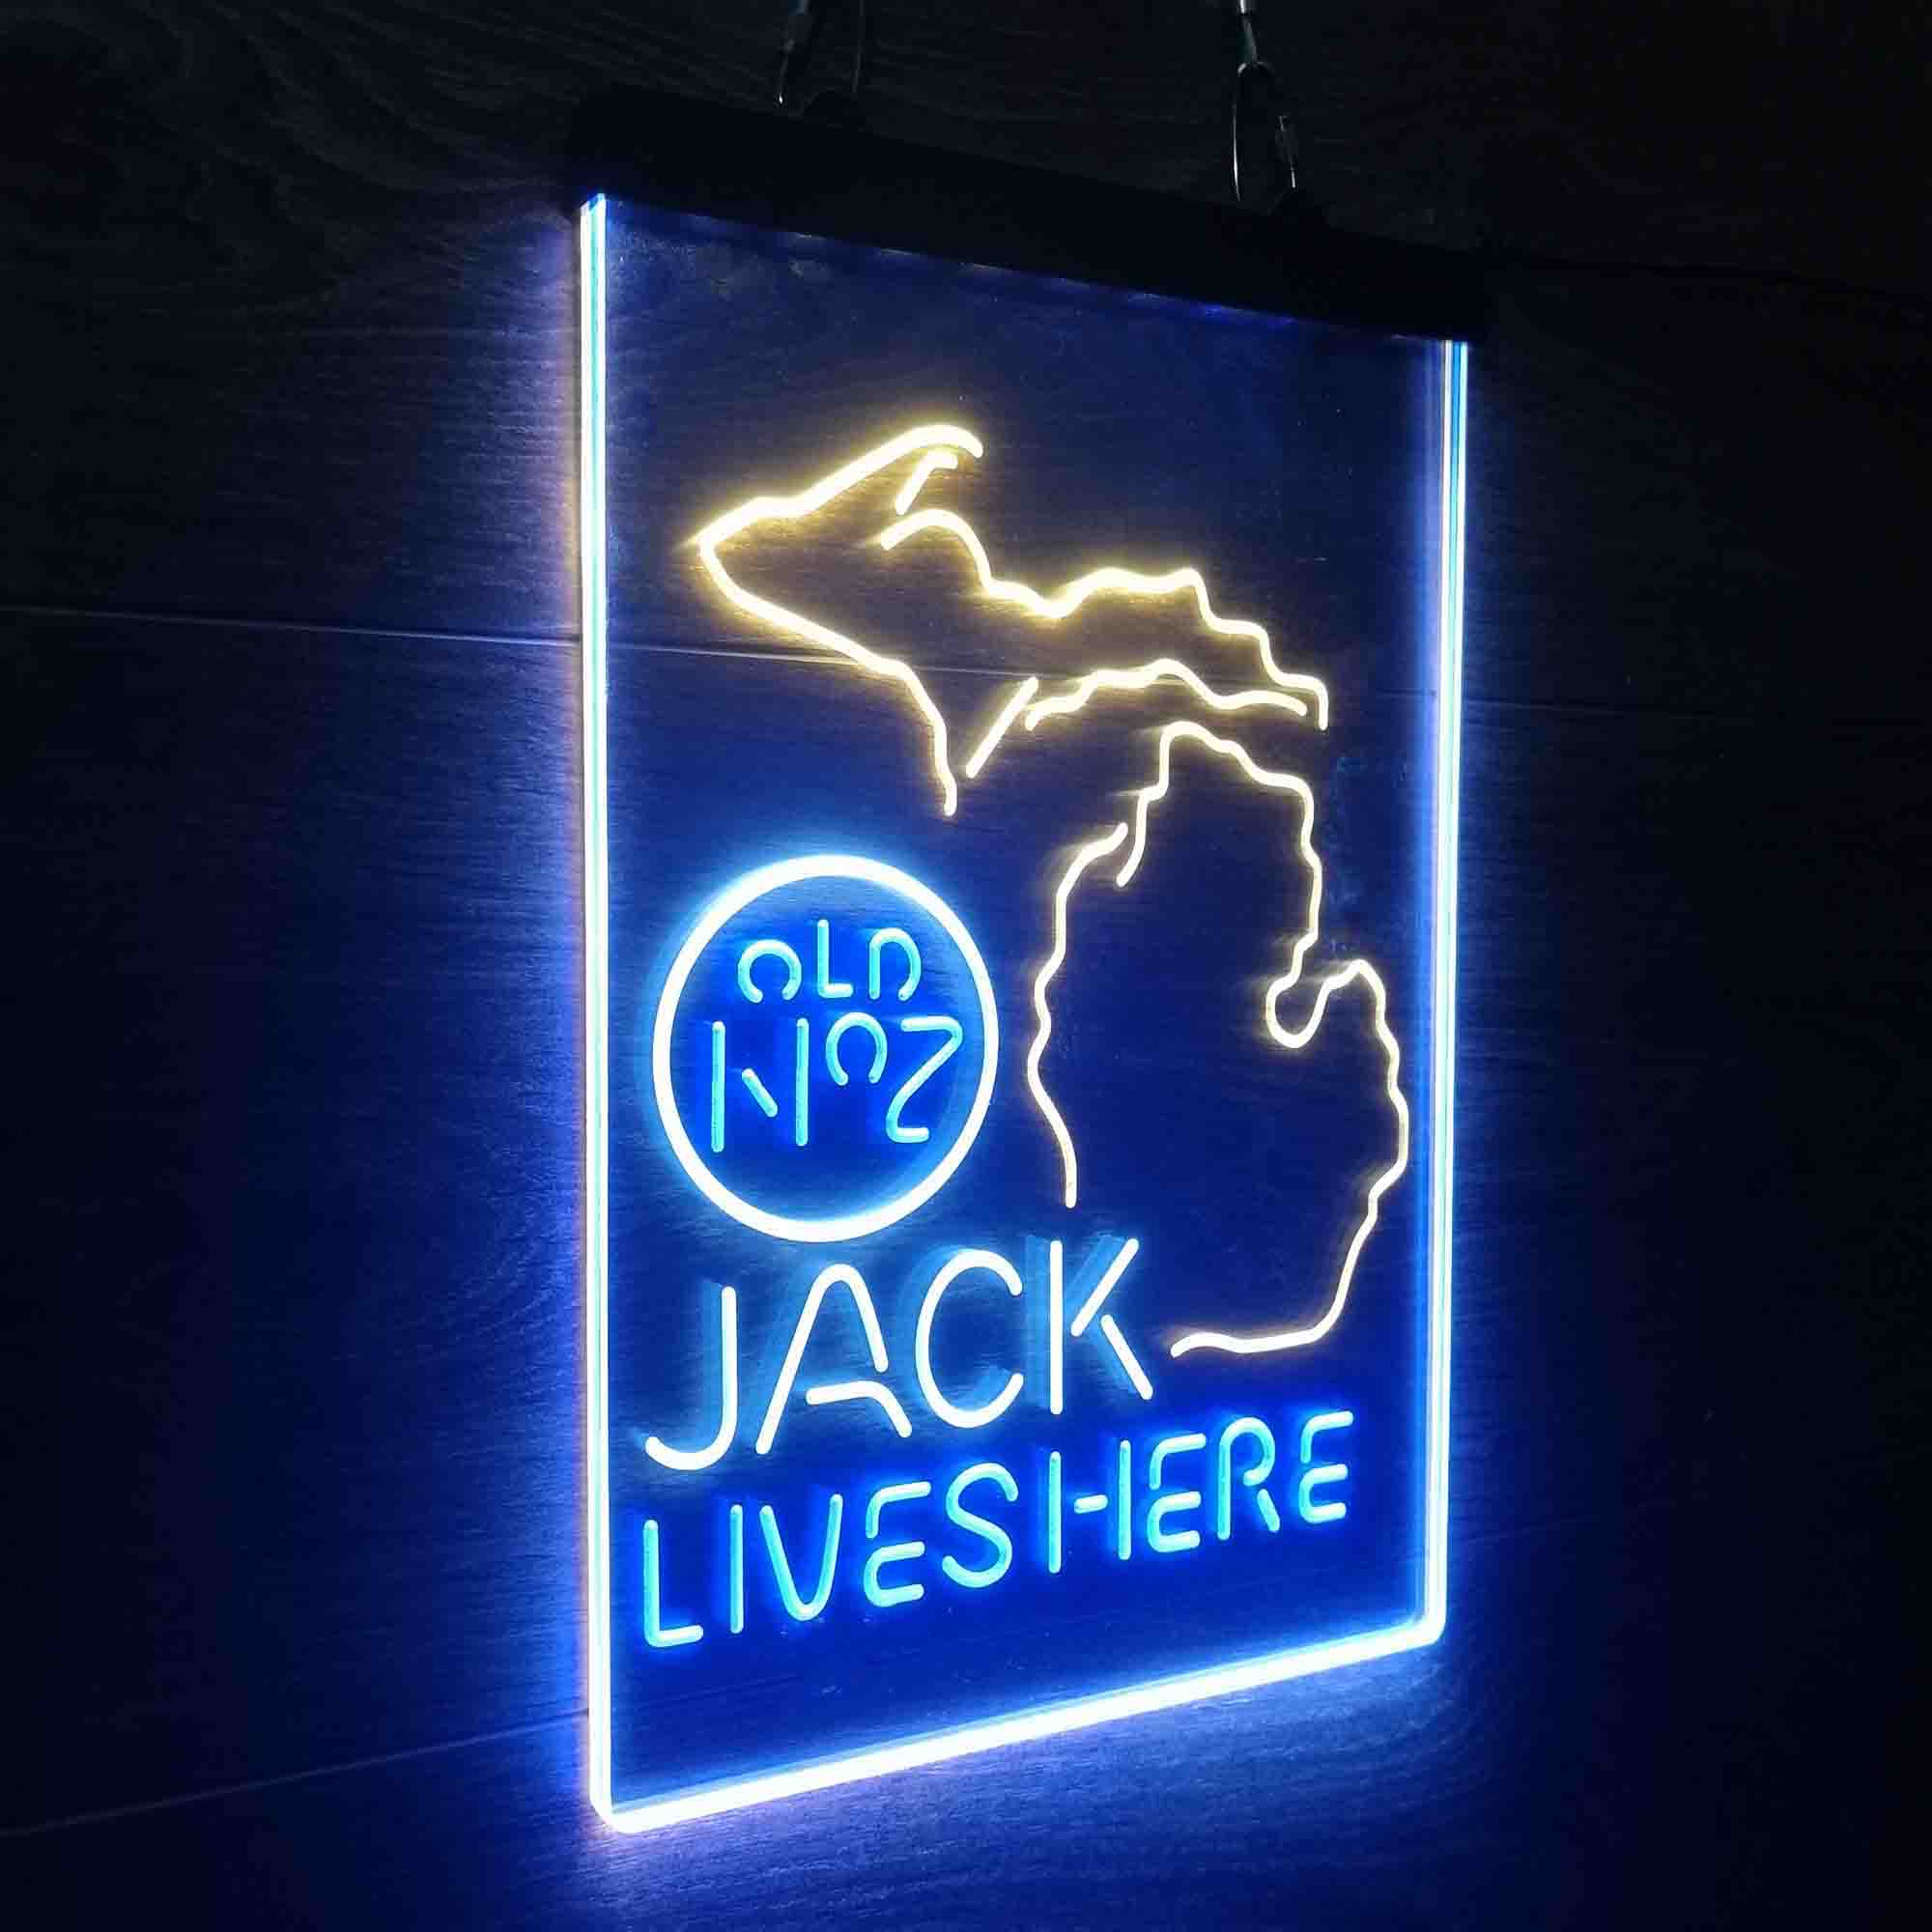 Michigan Jack Lives Here Neon LED Sign 3 Colors